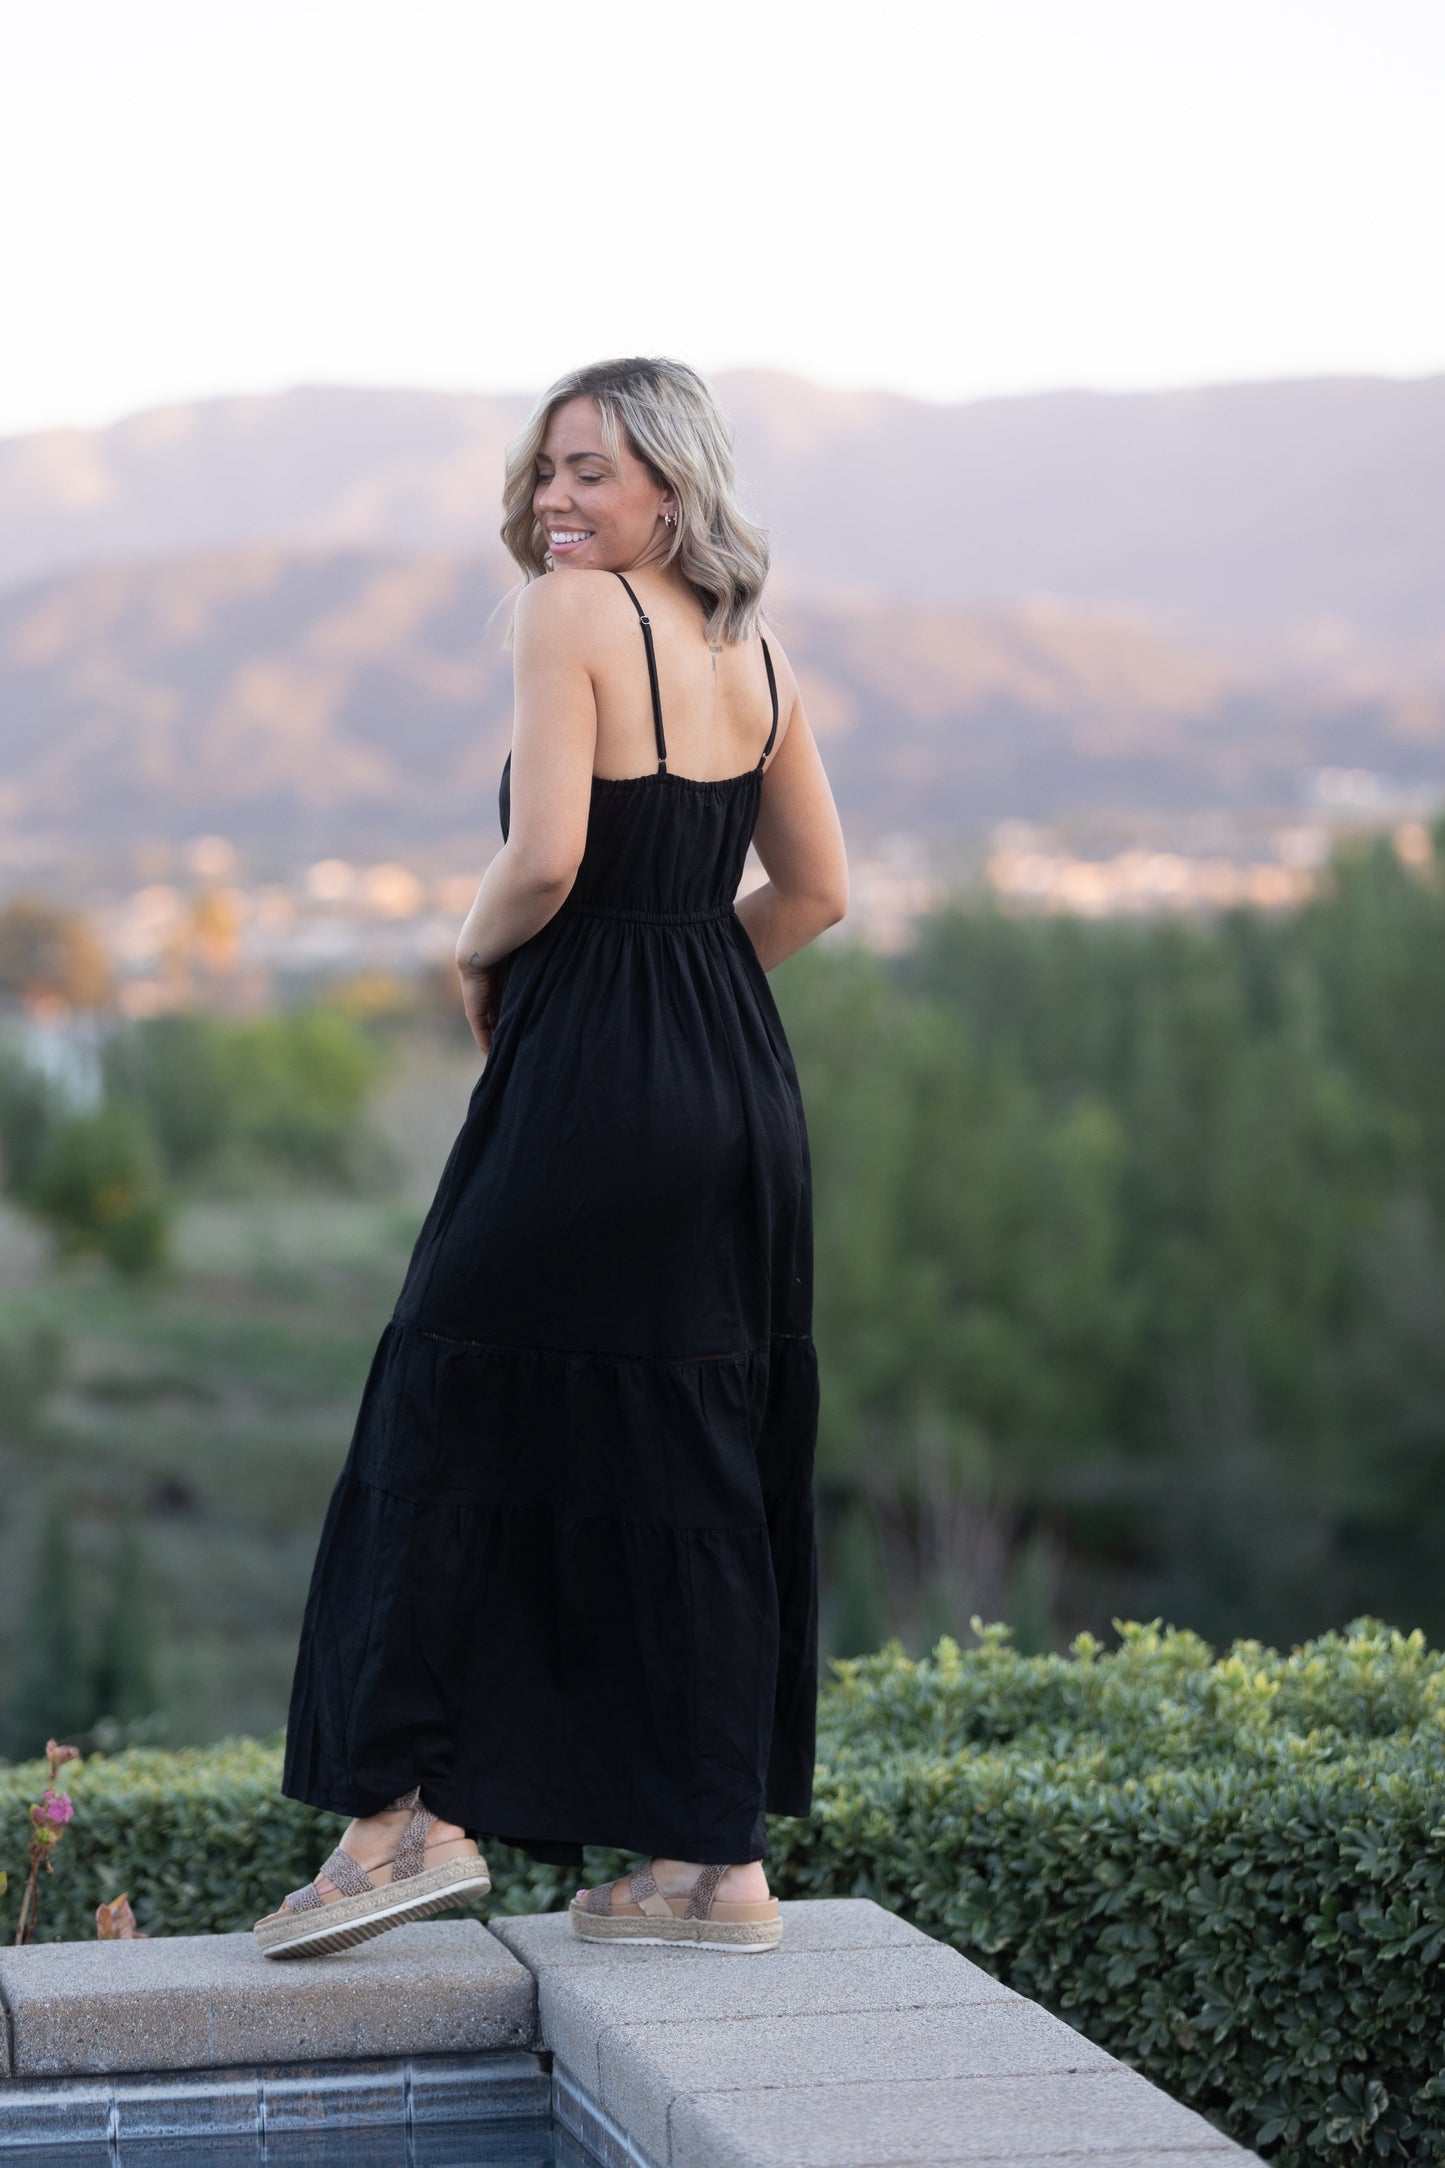 You're Still The One - Black Maxi